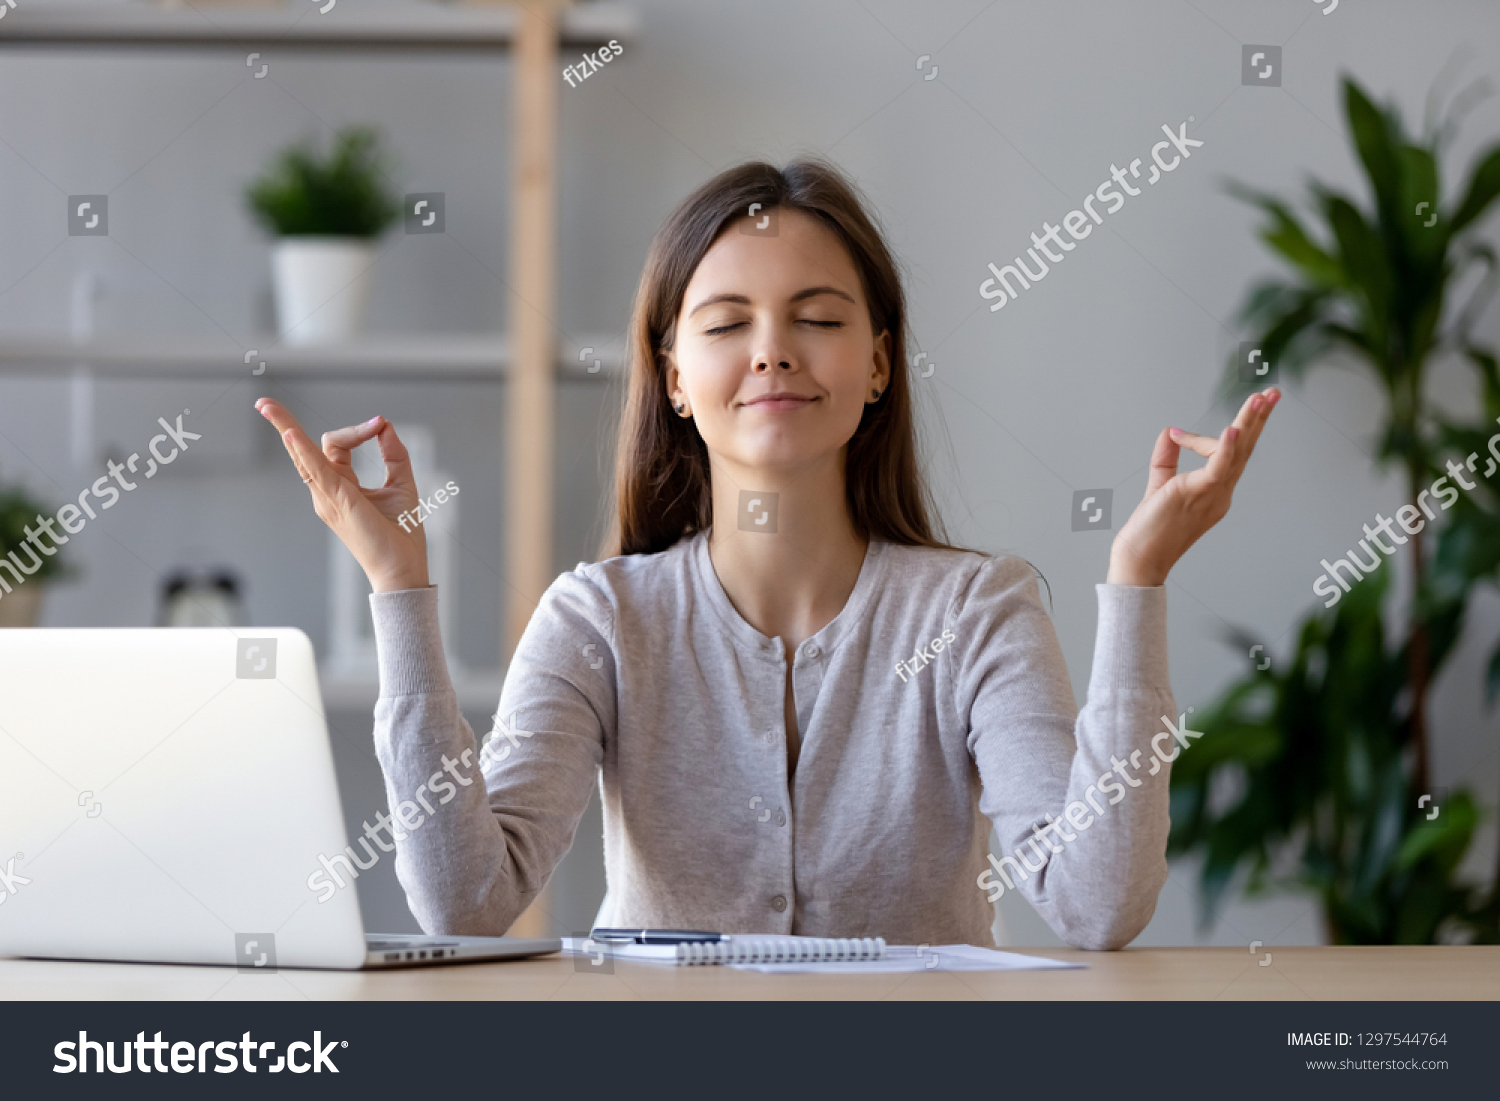 Calm young woman worker taking break doing yoga exercise at workplace, happy mindful female student meditating at home office desk feel balance harmony relaxation, stress relief zen at work concept #1297544764